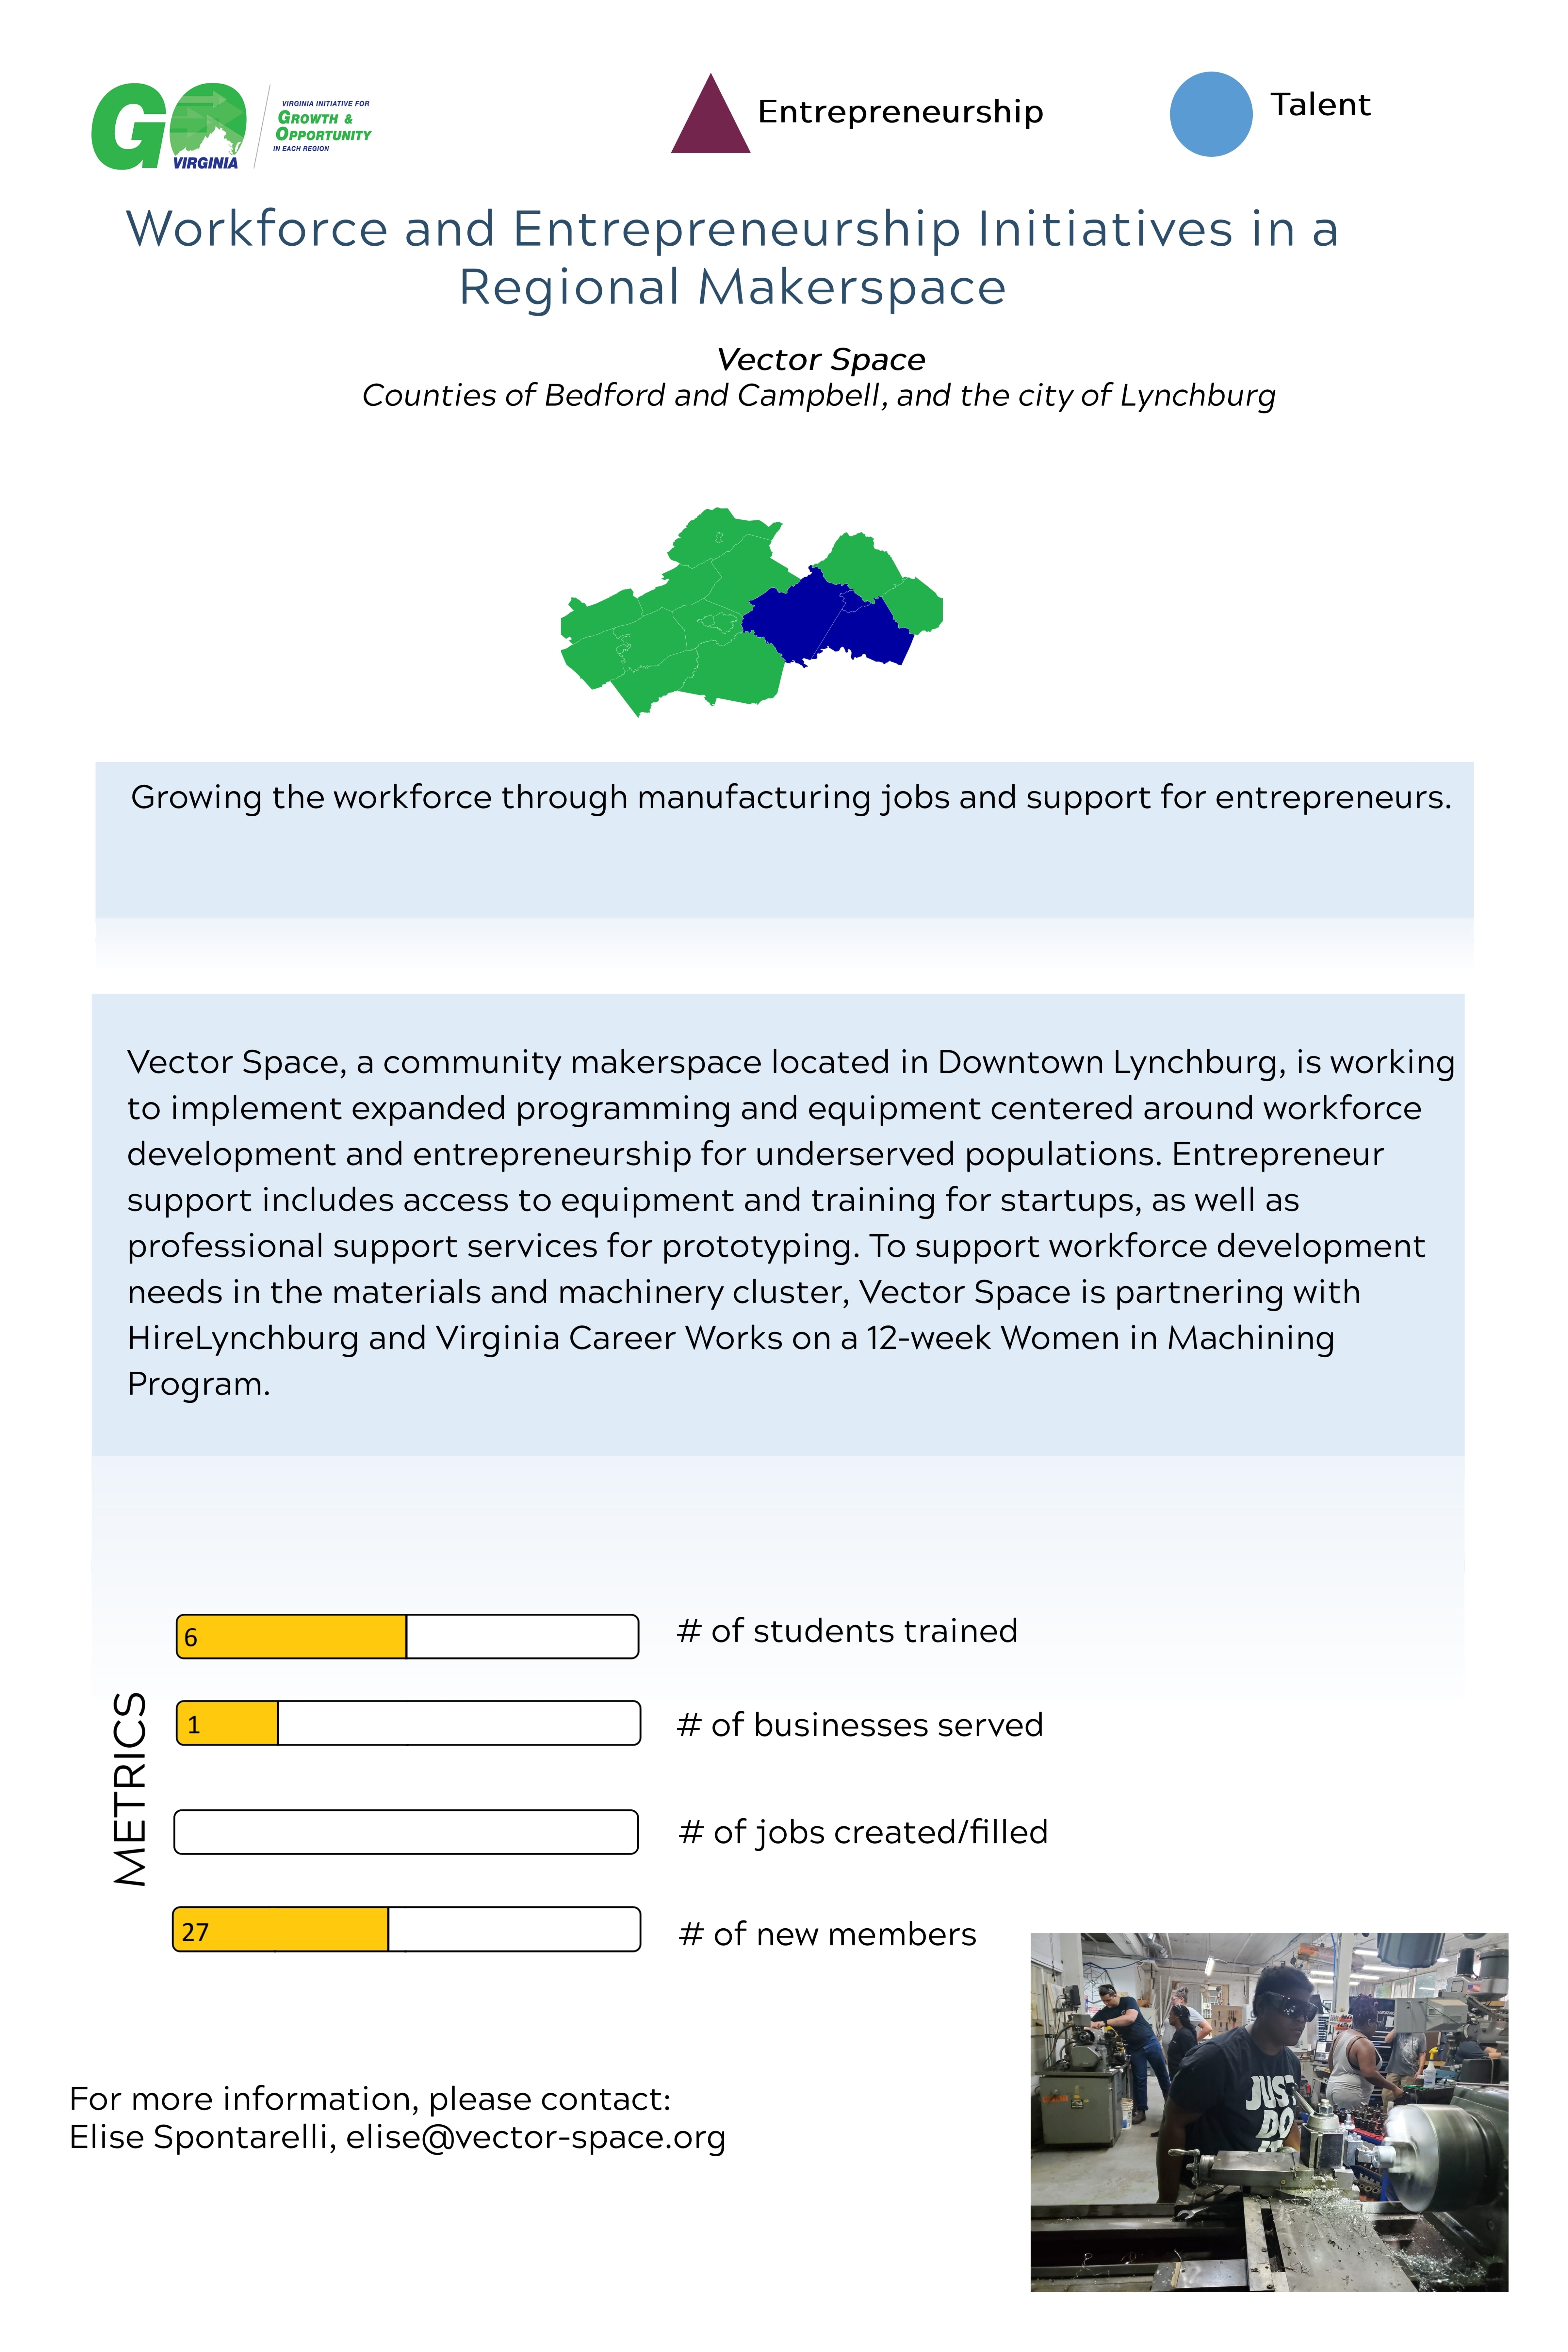 Workforce and Entrepreneurship Initiatives in a Regional Makerspace Poster